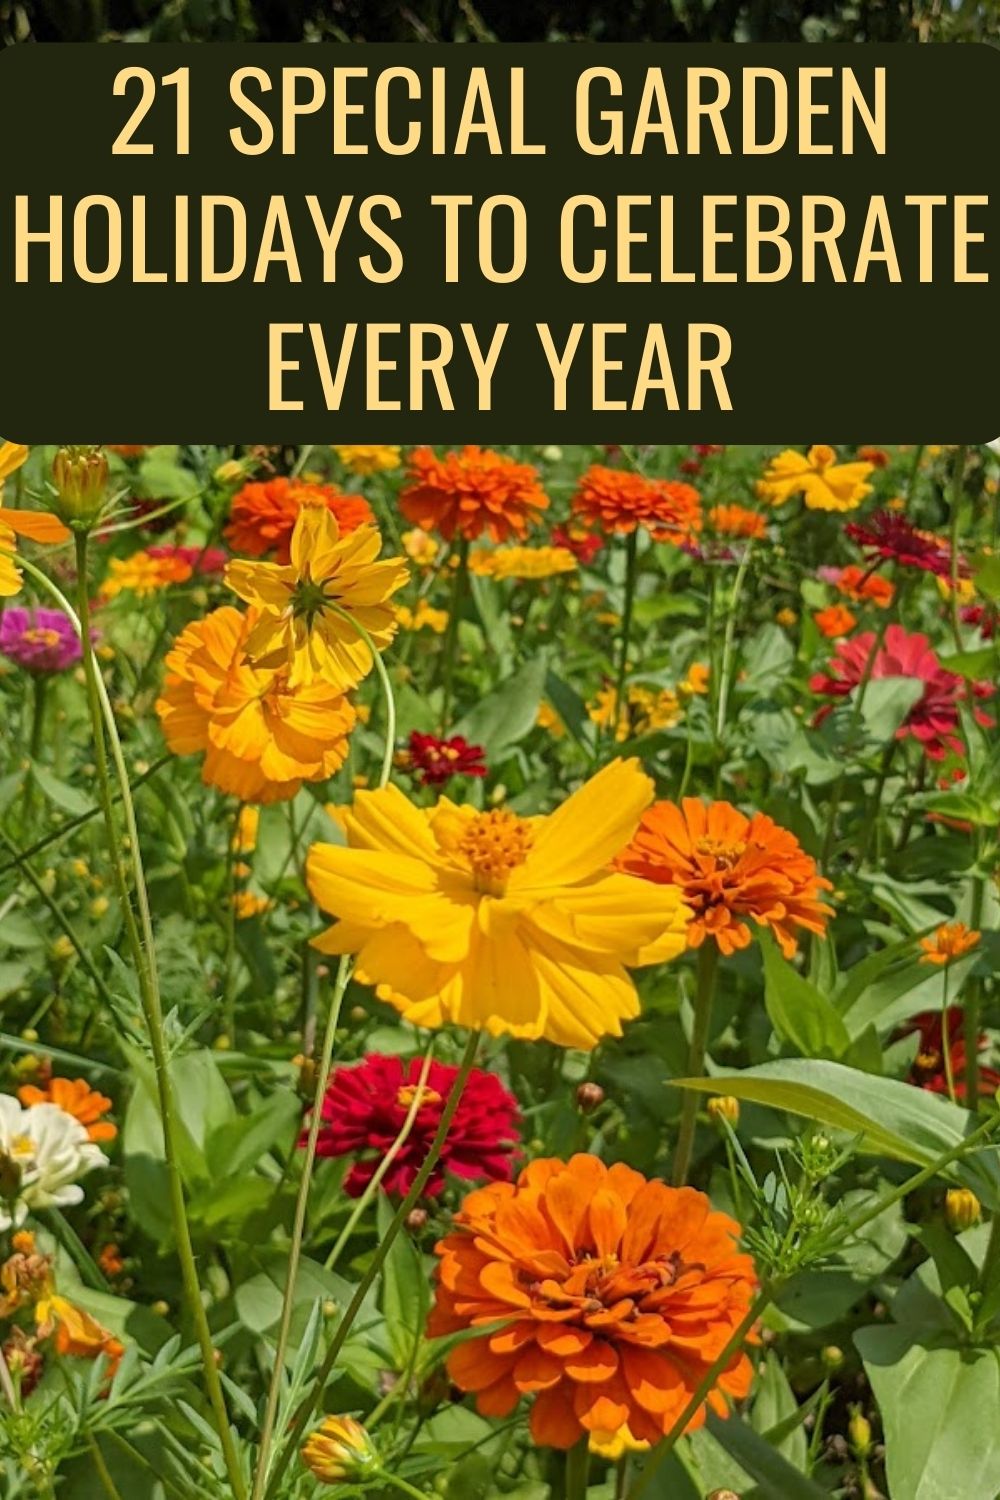 21 Special Garden Holidays To Celebrate Every Year